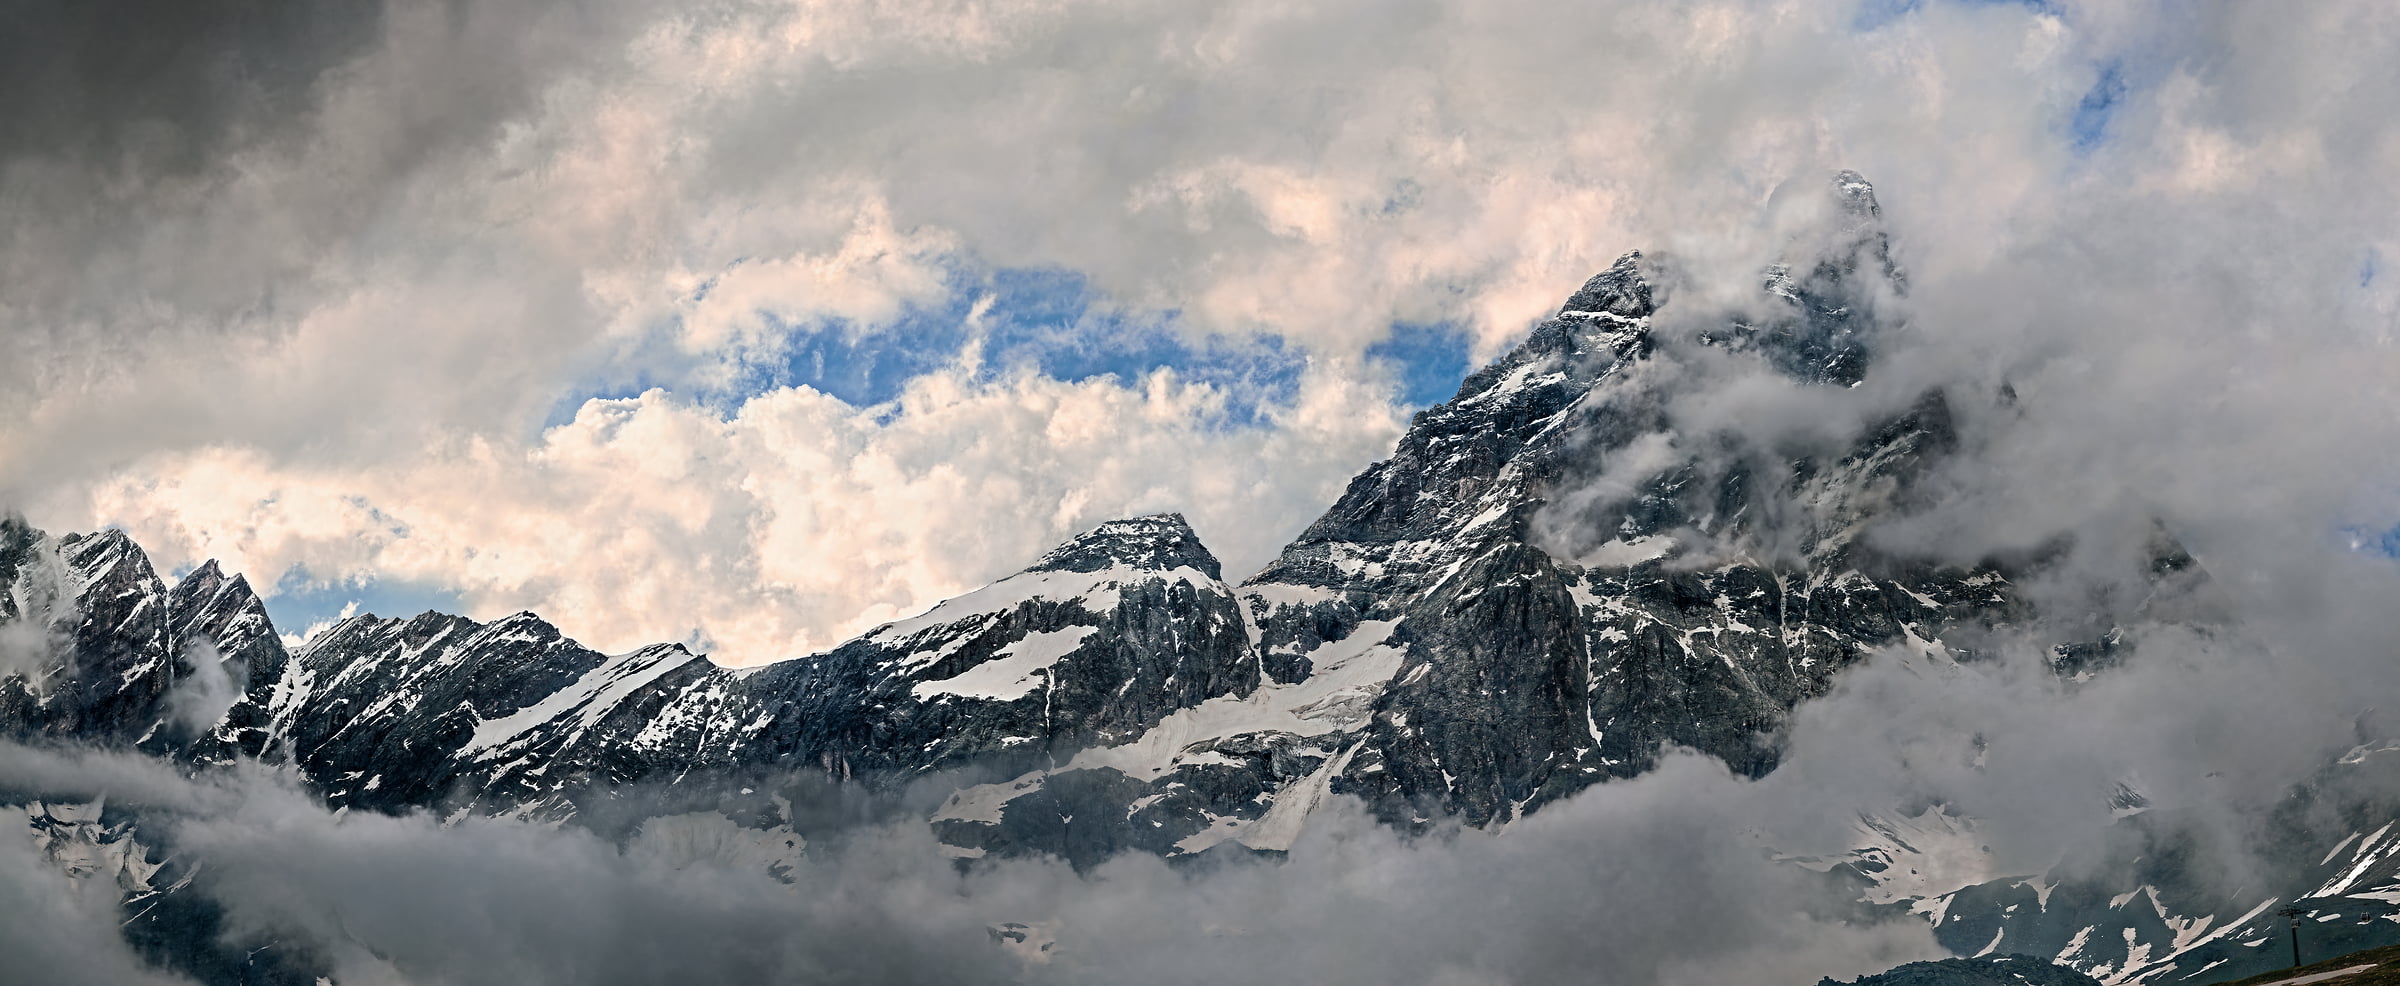 2,277 megapixels! A very high resolution, large-format VAST photo print of the Matterhorn; mountain landscape photograph created by Duilio Fiorille in Valtournenche, Italy.